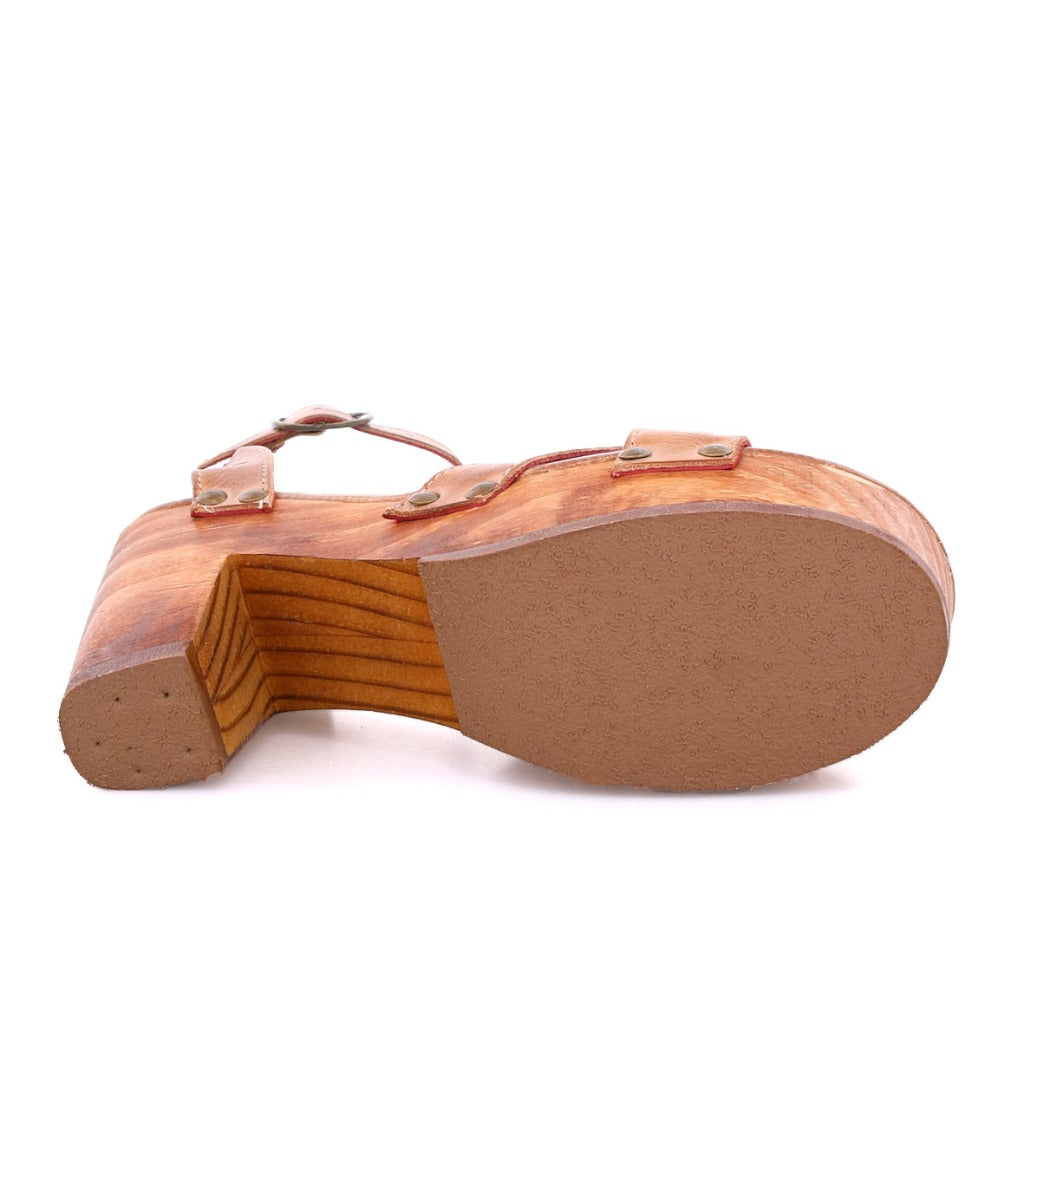 A pair of Bed Stu Kalah wooden sandals on a white background.